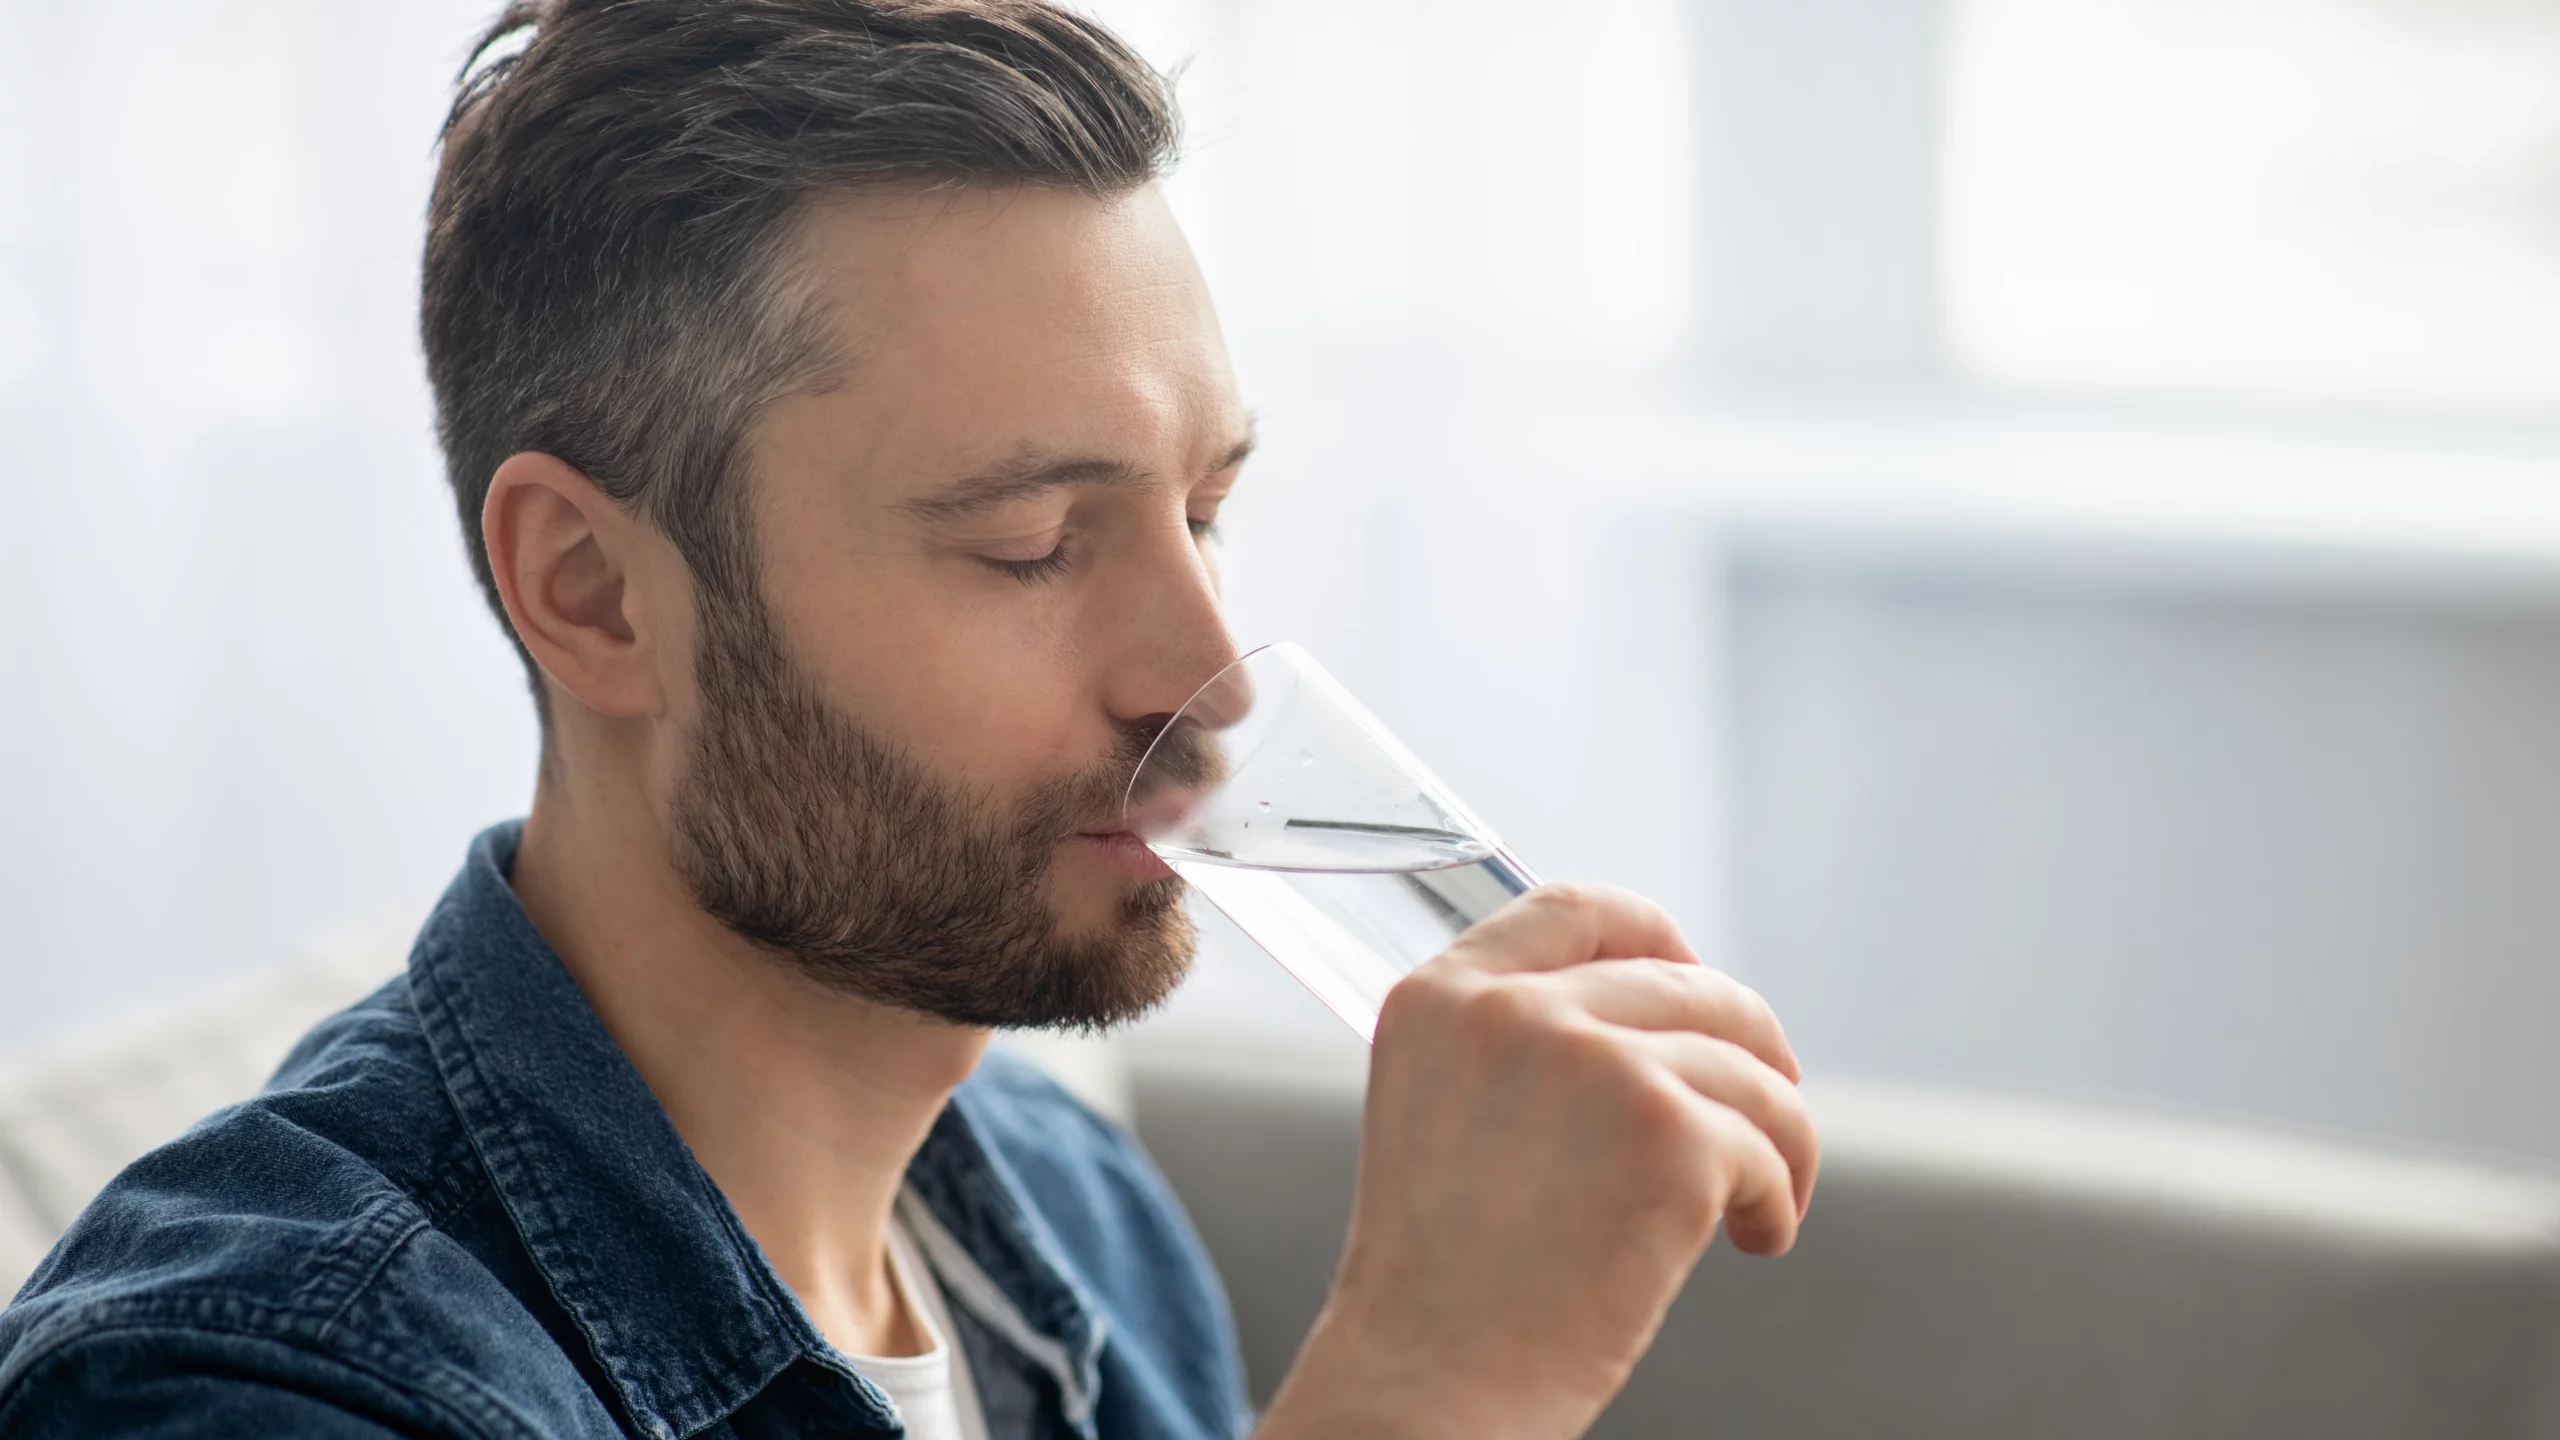 Side profile of a man with a beard drinking a glass of water.